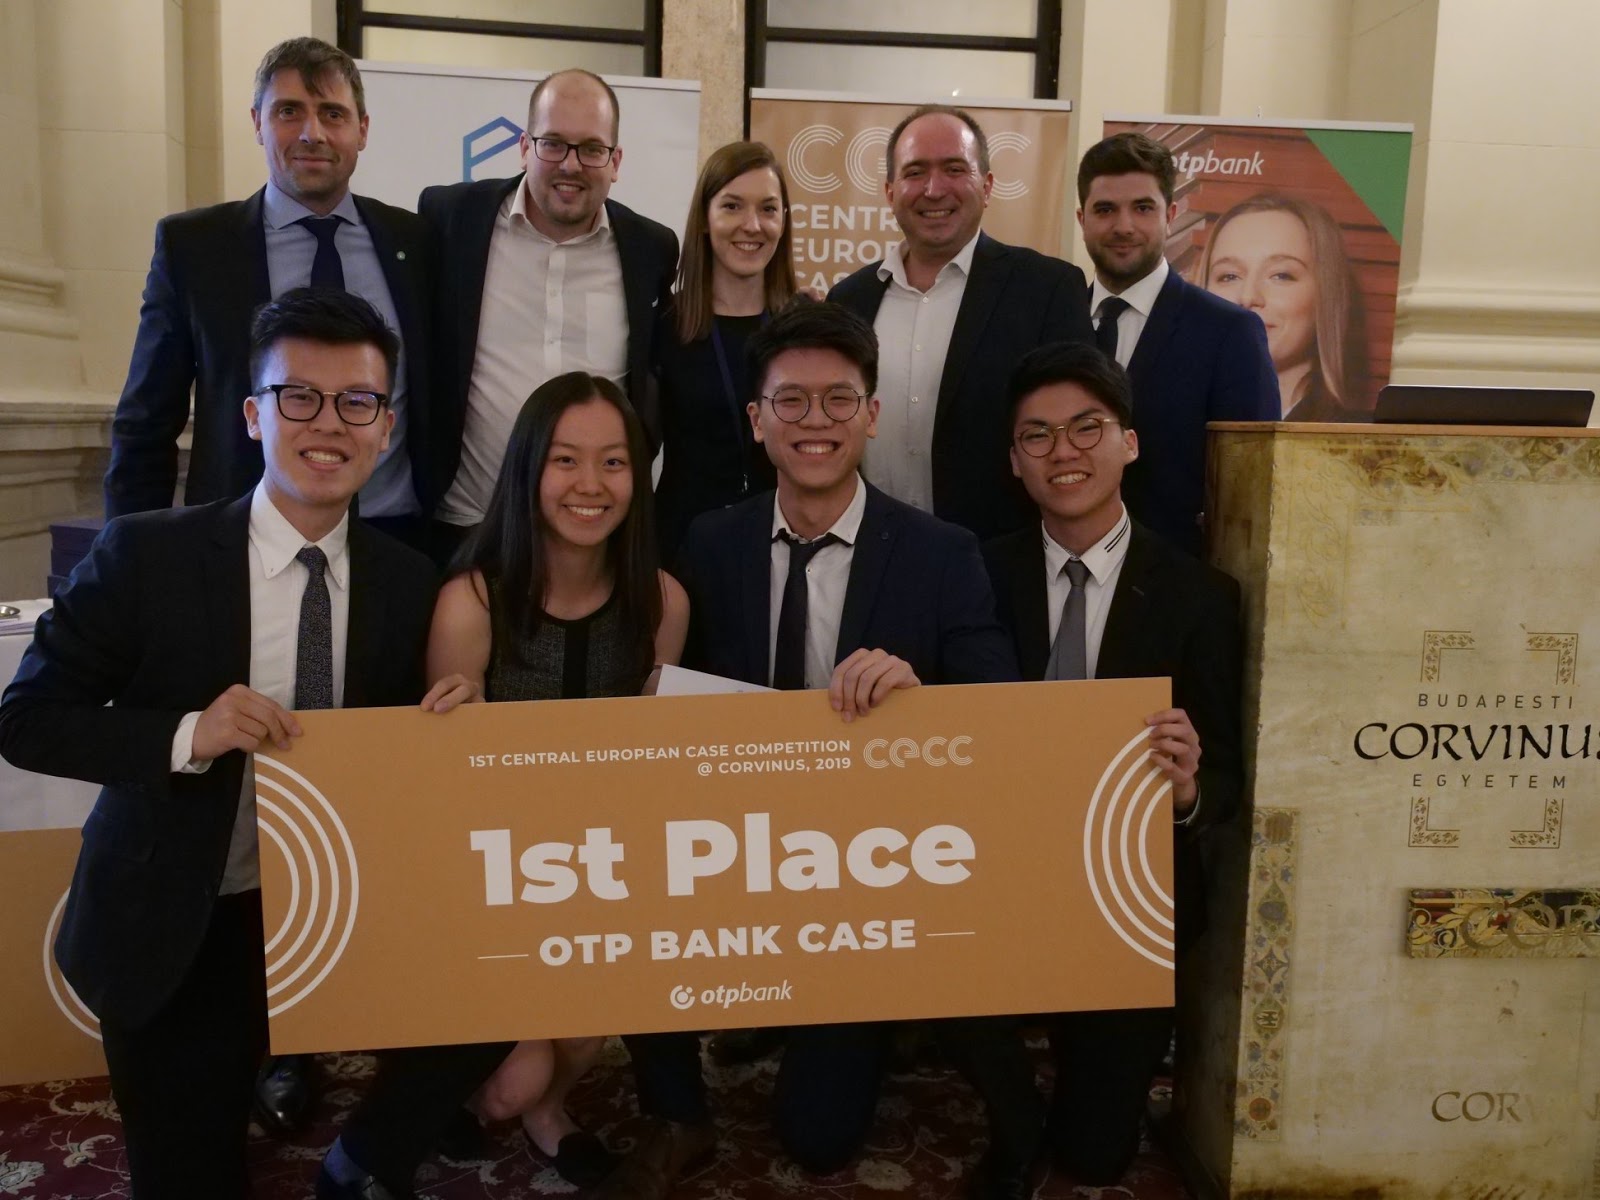 Batch 9 students triumphed at the 2019 Central European Case Competition